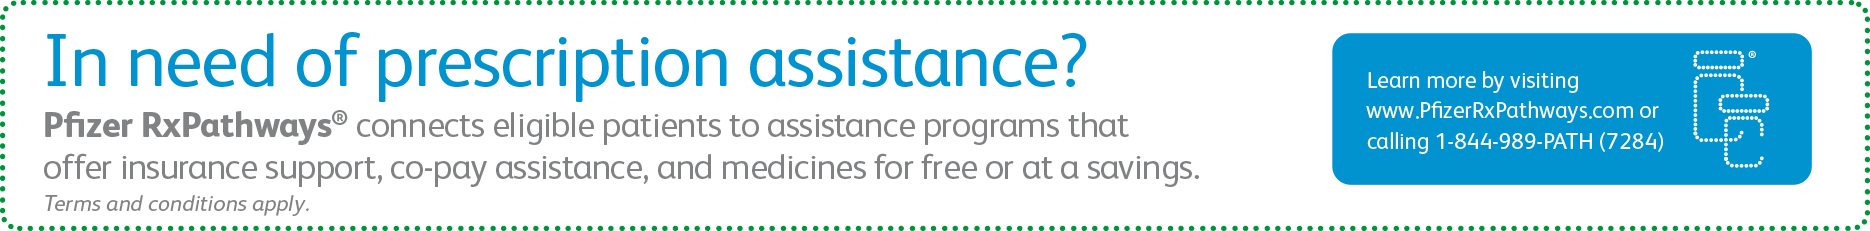 Pfizer RxPathways connects eligible patients to assistance programs that offer insurance support, co-pay assistance, and medicines for free at a savings. 